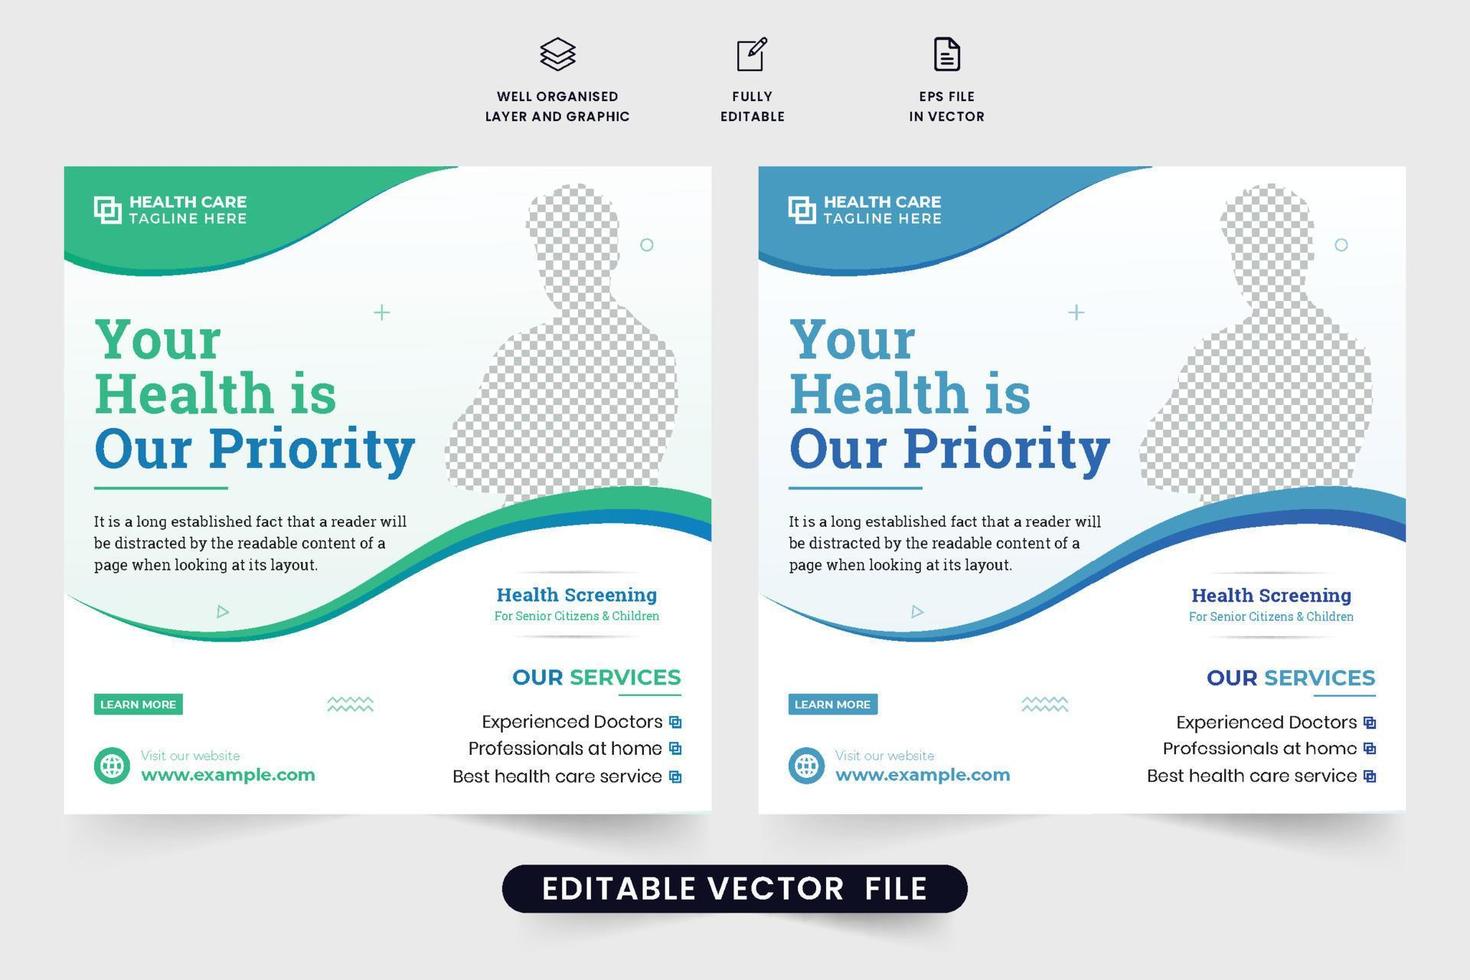 Medical treatment and healthcare template vector with photo placeholders. Modern clinical service social media post design with green and blue colors. Hospital doctor promotional web banner vector.